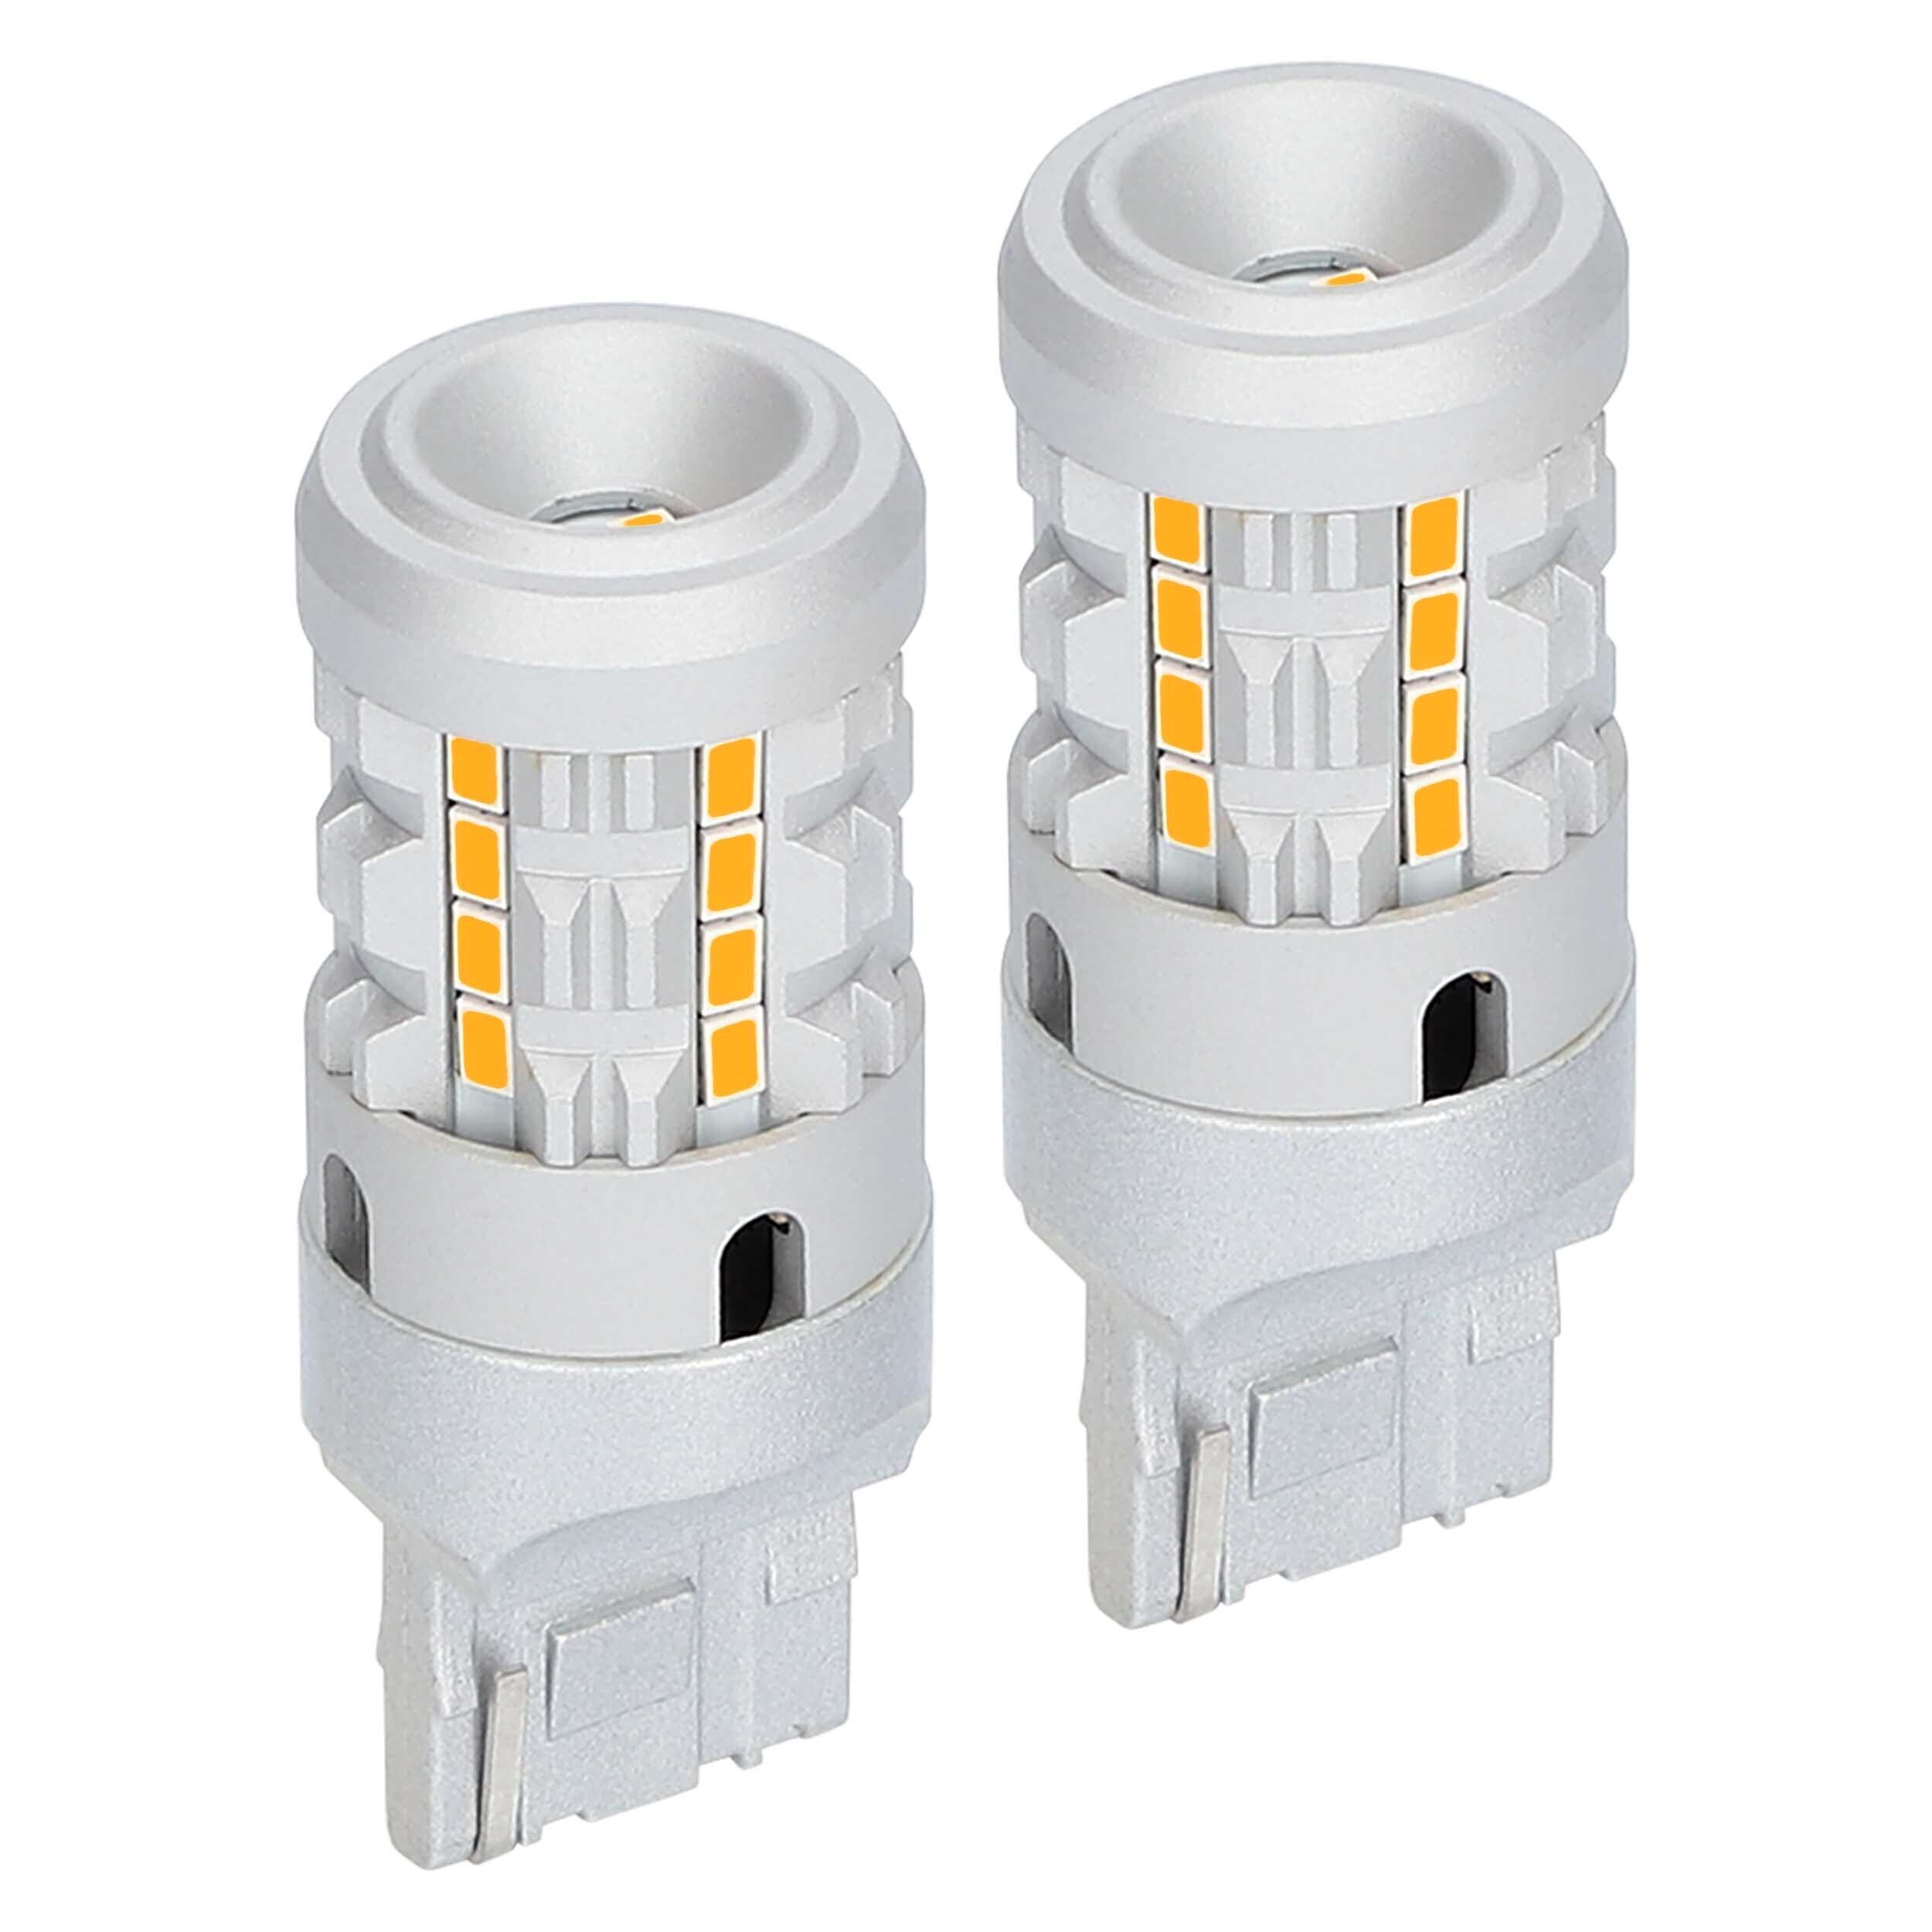 7440 Amber Bulbs with Integrated Internal CANBUS System - 2-Pack